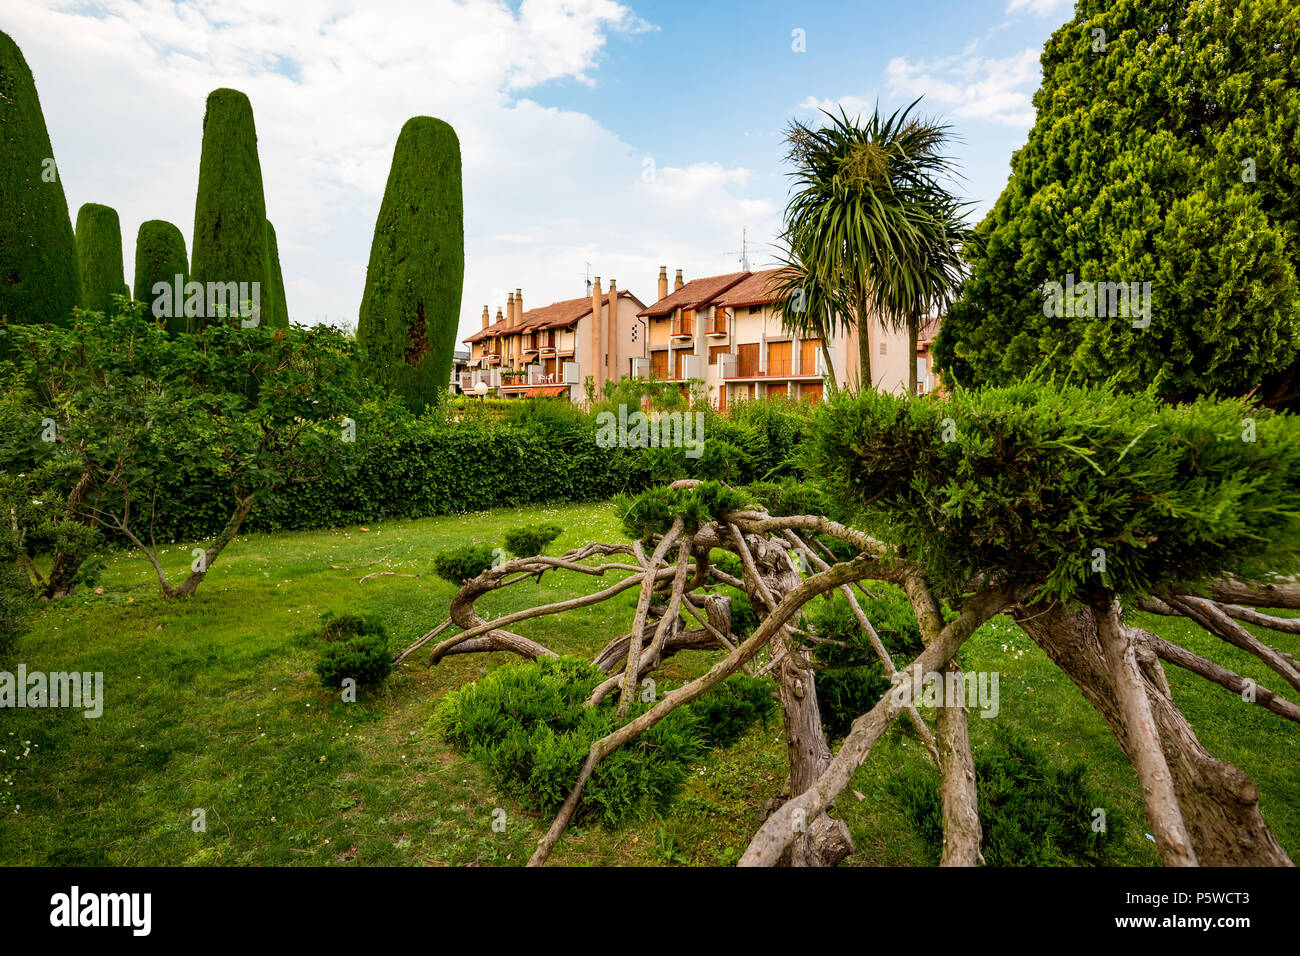 Public city park with several strangely shaped cypress trees in Sirmione next to lake Lago di Garda, Italy Stock Photo